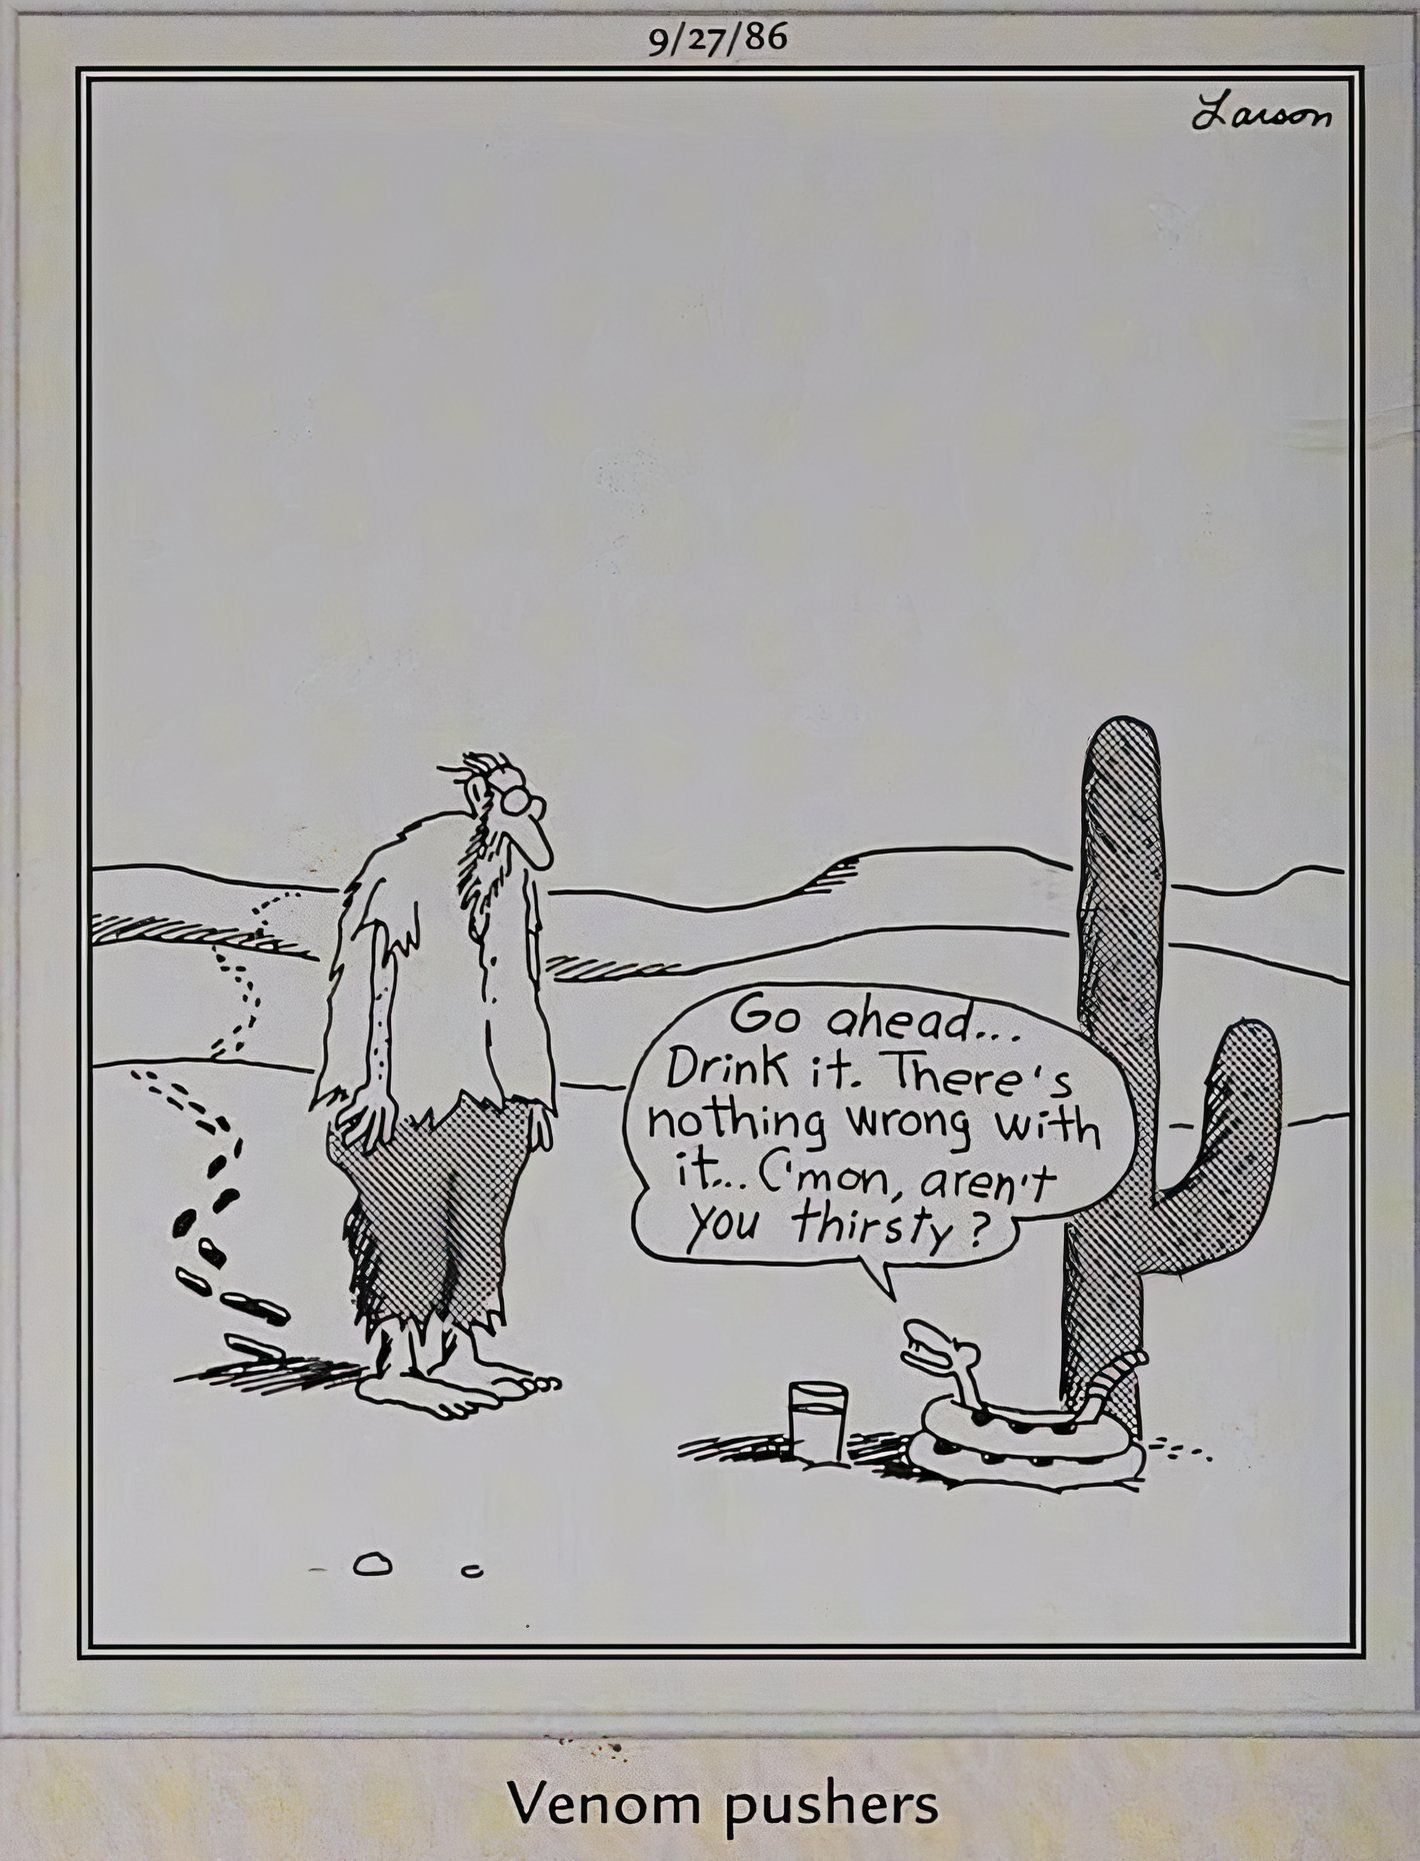 Far Side, man lost in the desert encounters a 'venom pusher' snake trying to get him to drink poison